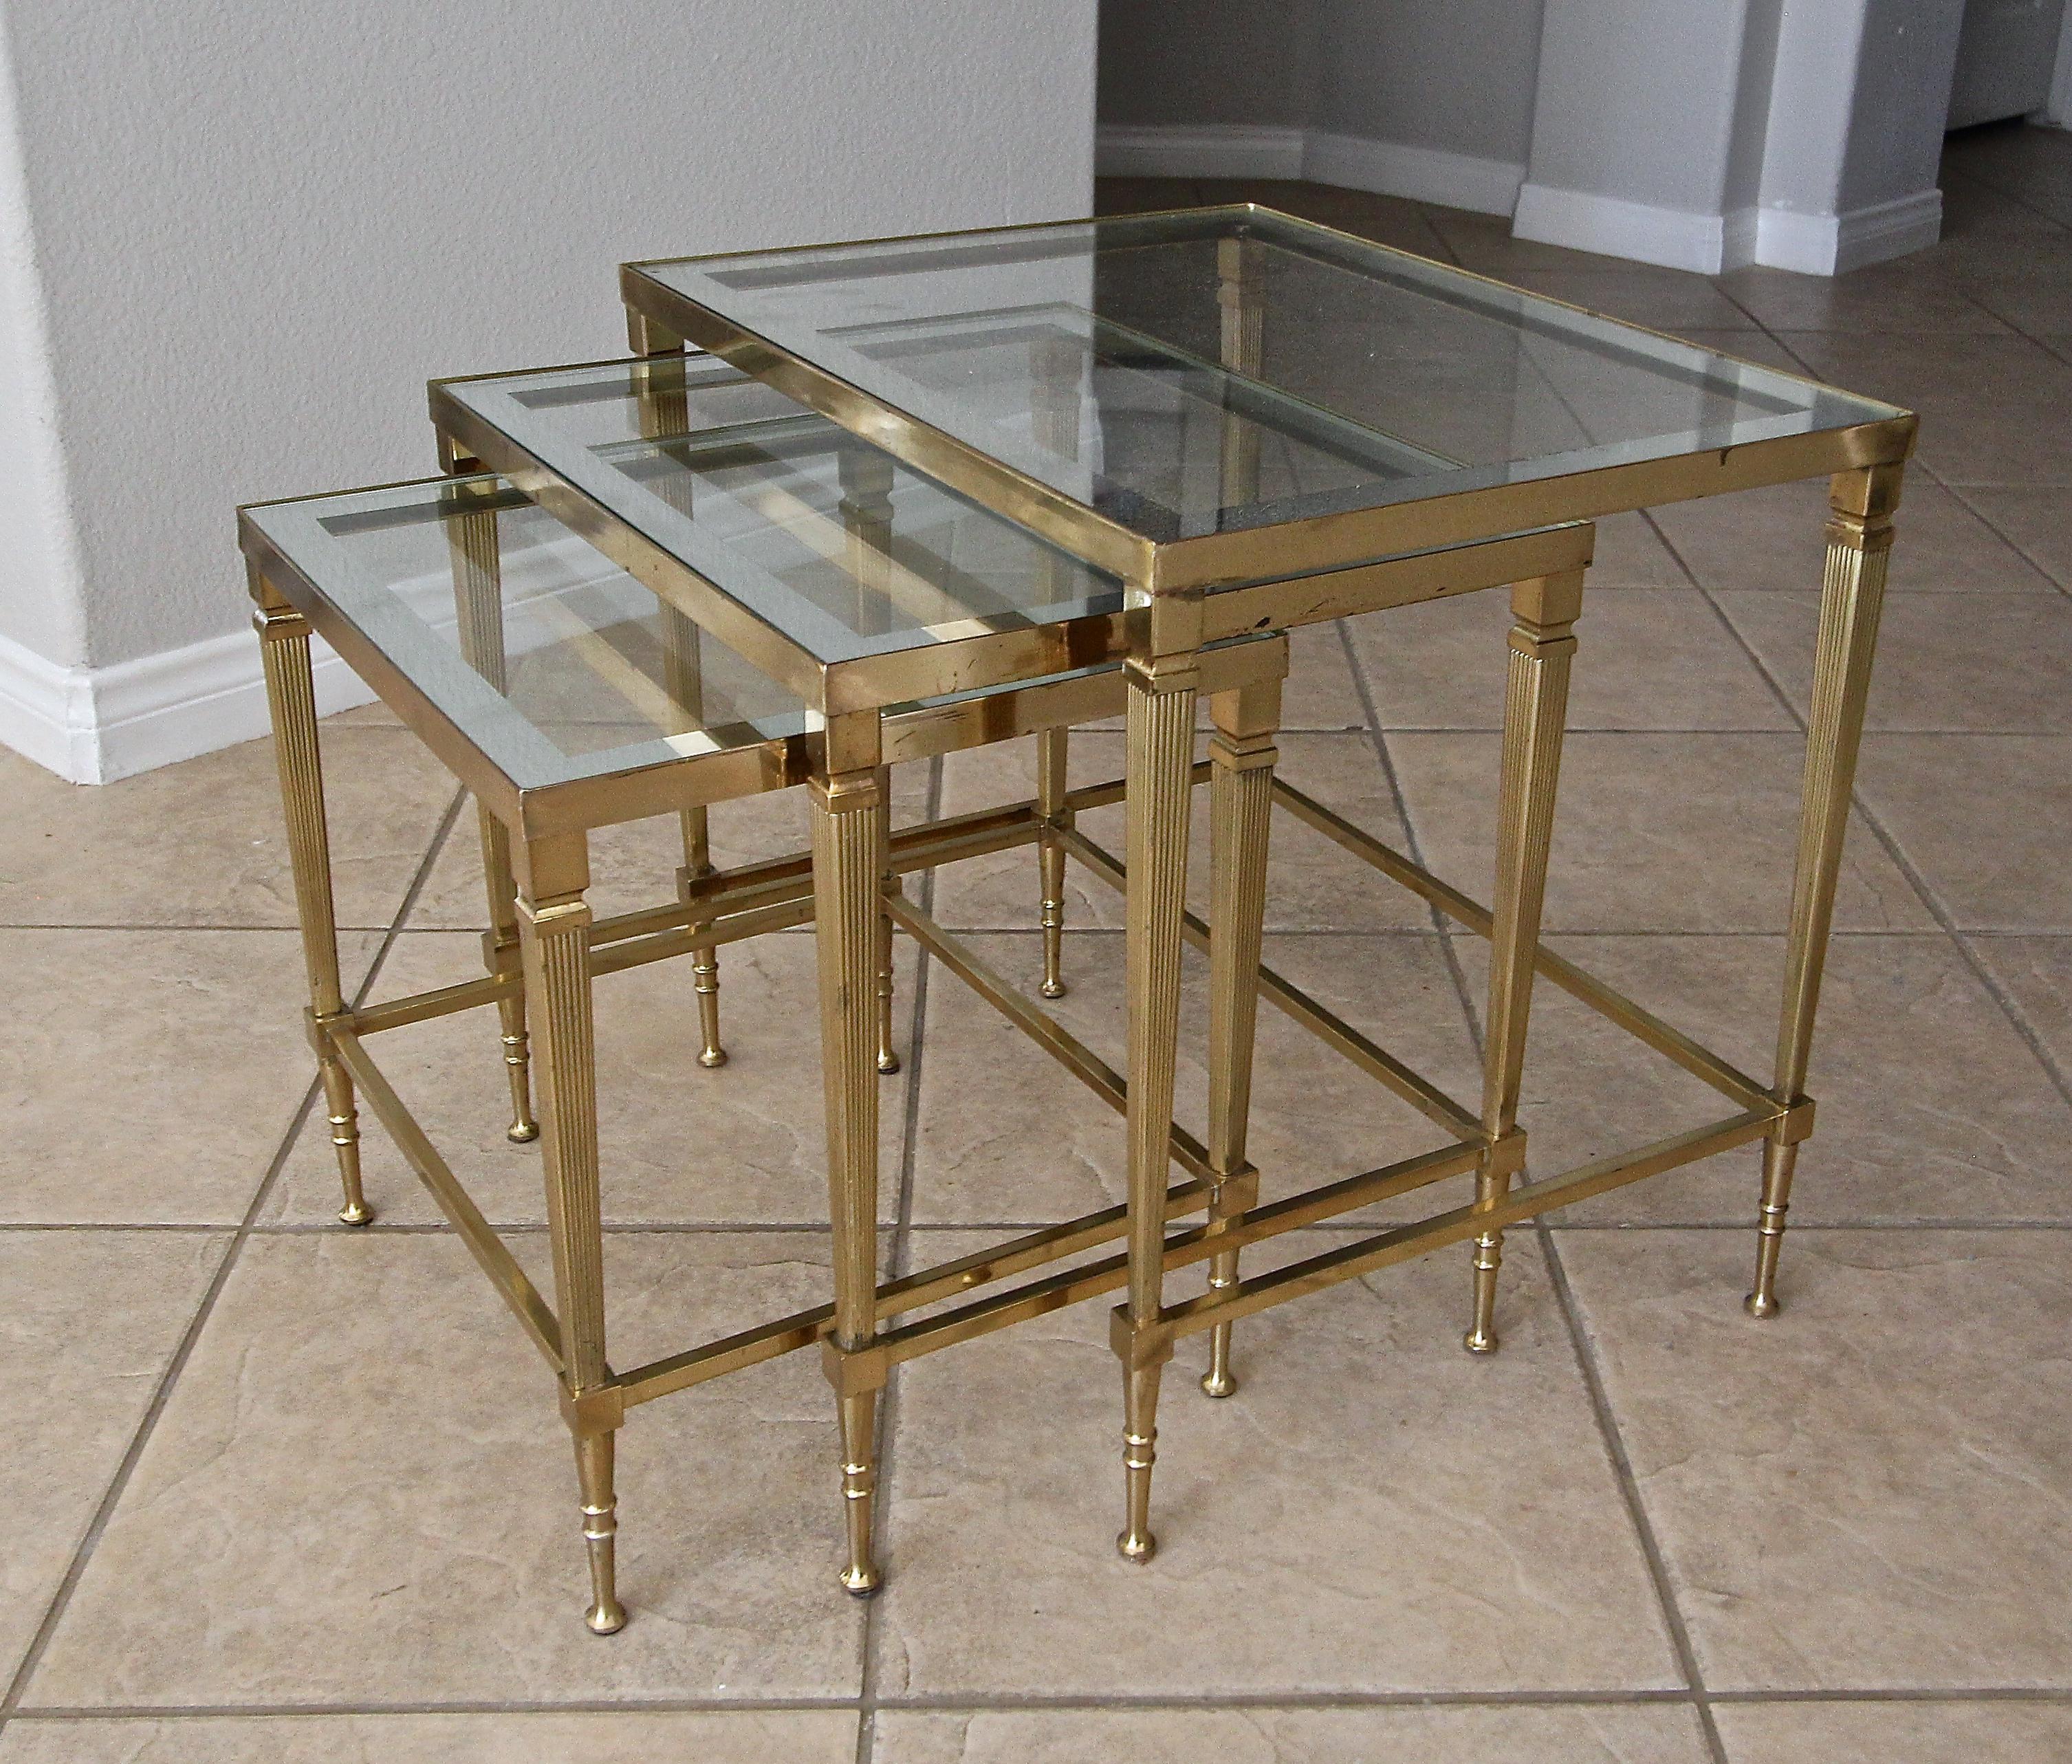 Trio of Maison Jansen brass nesting tables with mirrored edge glass tops. Nice original finish with age appropriate oxidation spots. Two of the glass tops are newer replacements, the larger one is original with some oxidation mirror loss. See photos